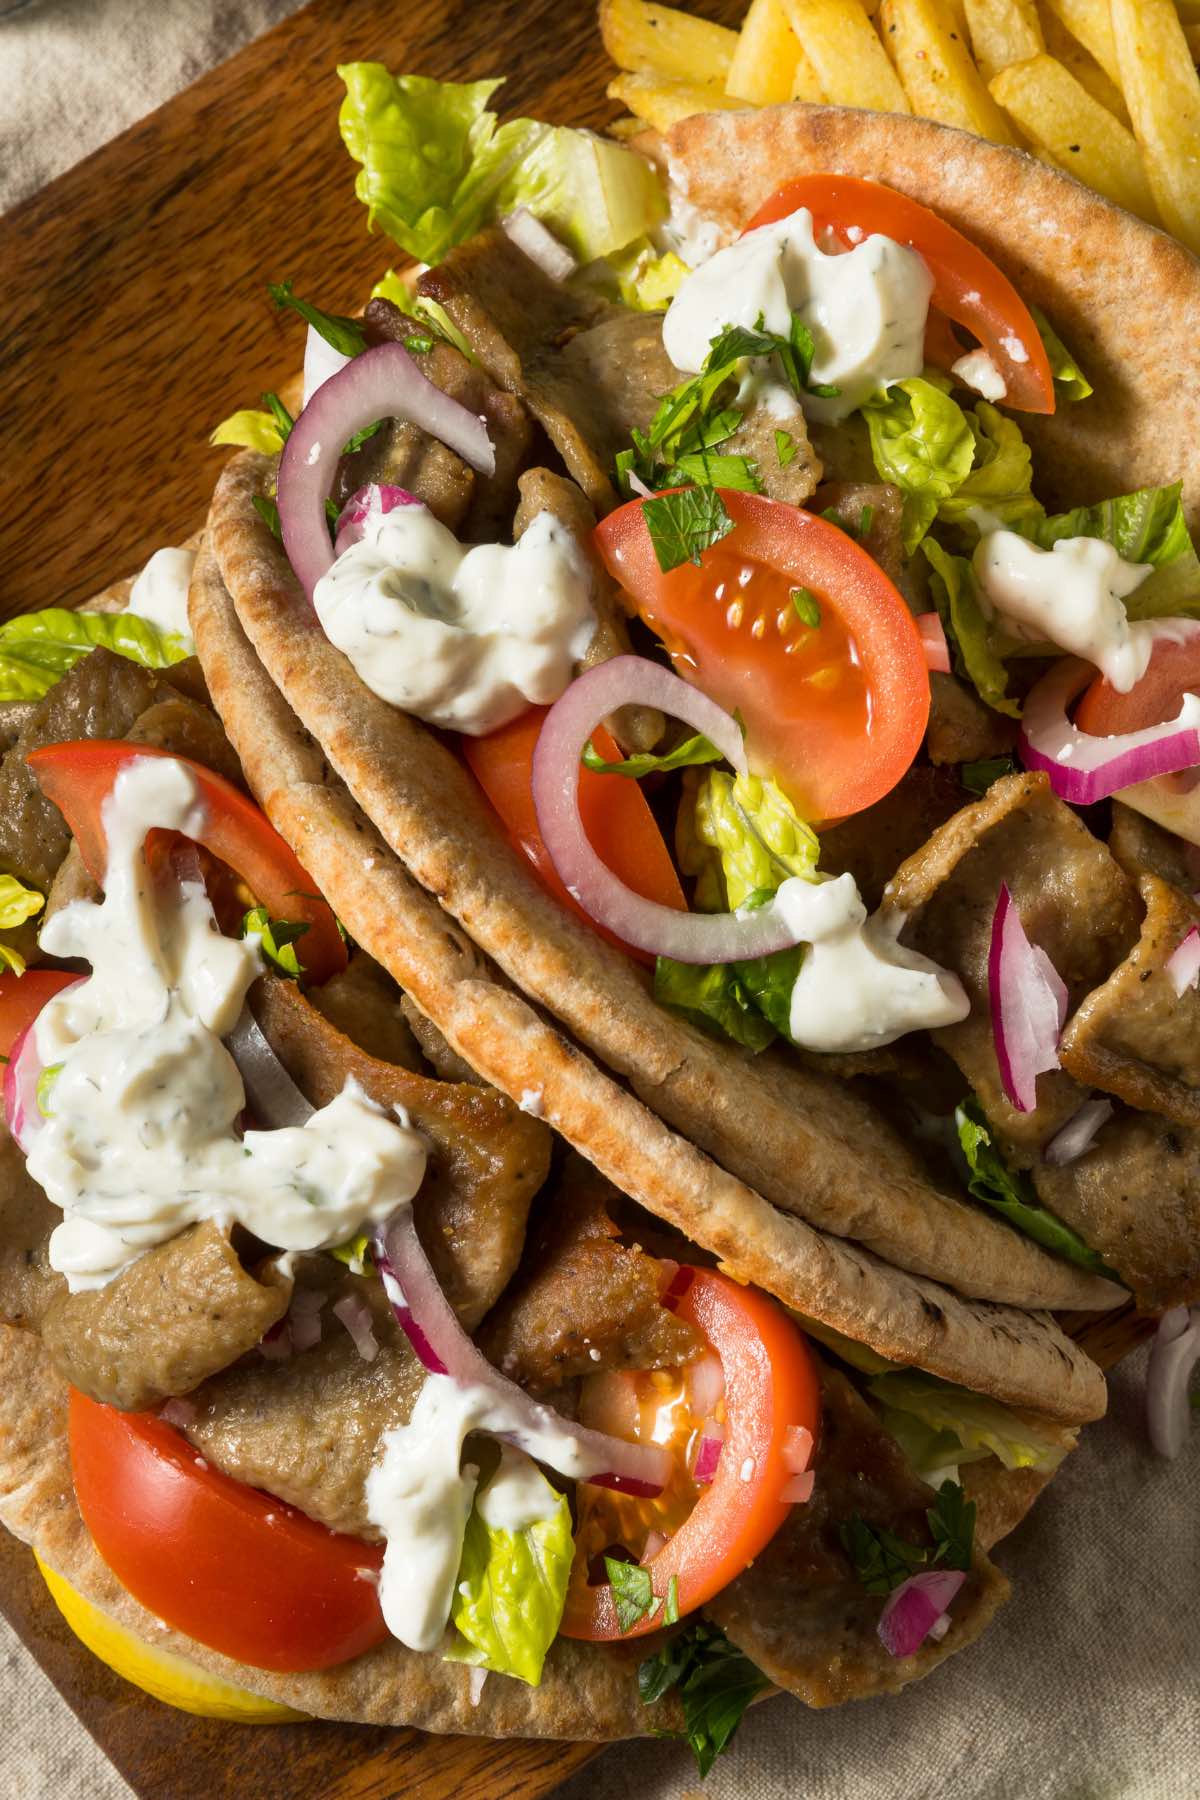 The Easy Greek Gyro Sandwich is gyro meat, fresh vegetables, and feta cheese wrapped in warm pita bread. You can top it with Tzatziki sauce, and it's the ultimate sandwich for Greek food lovers!